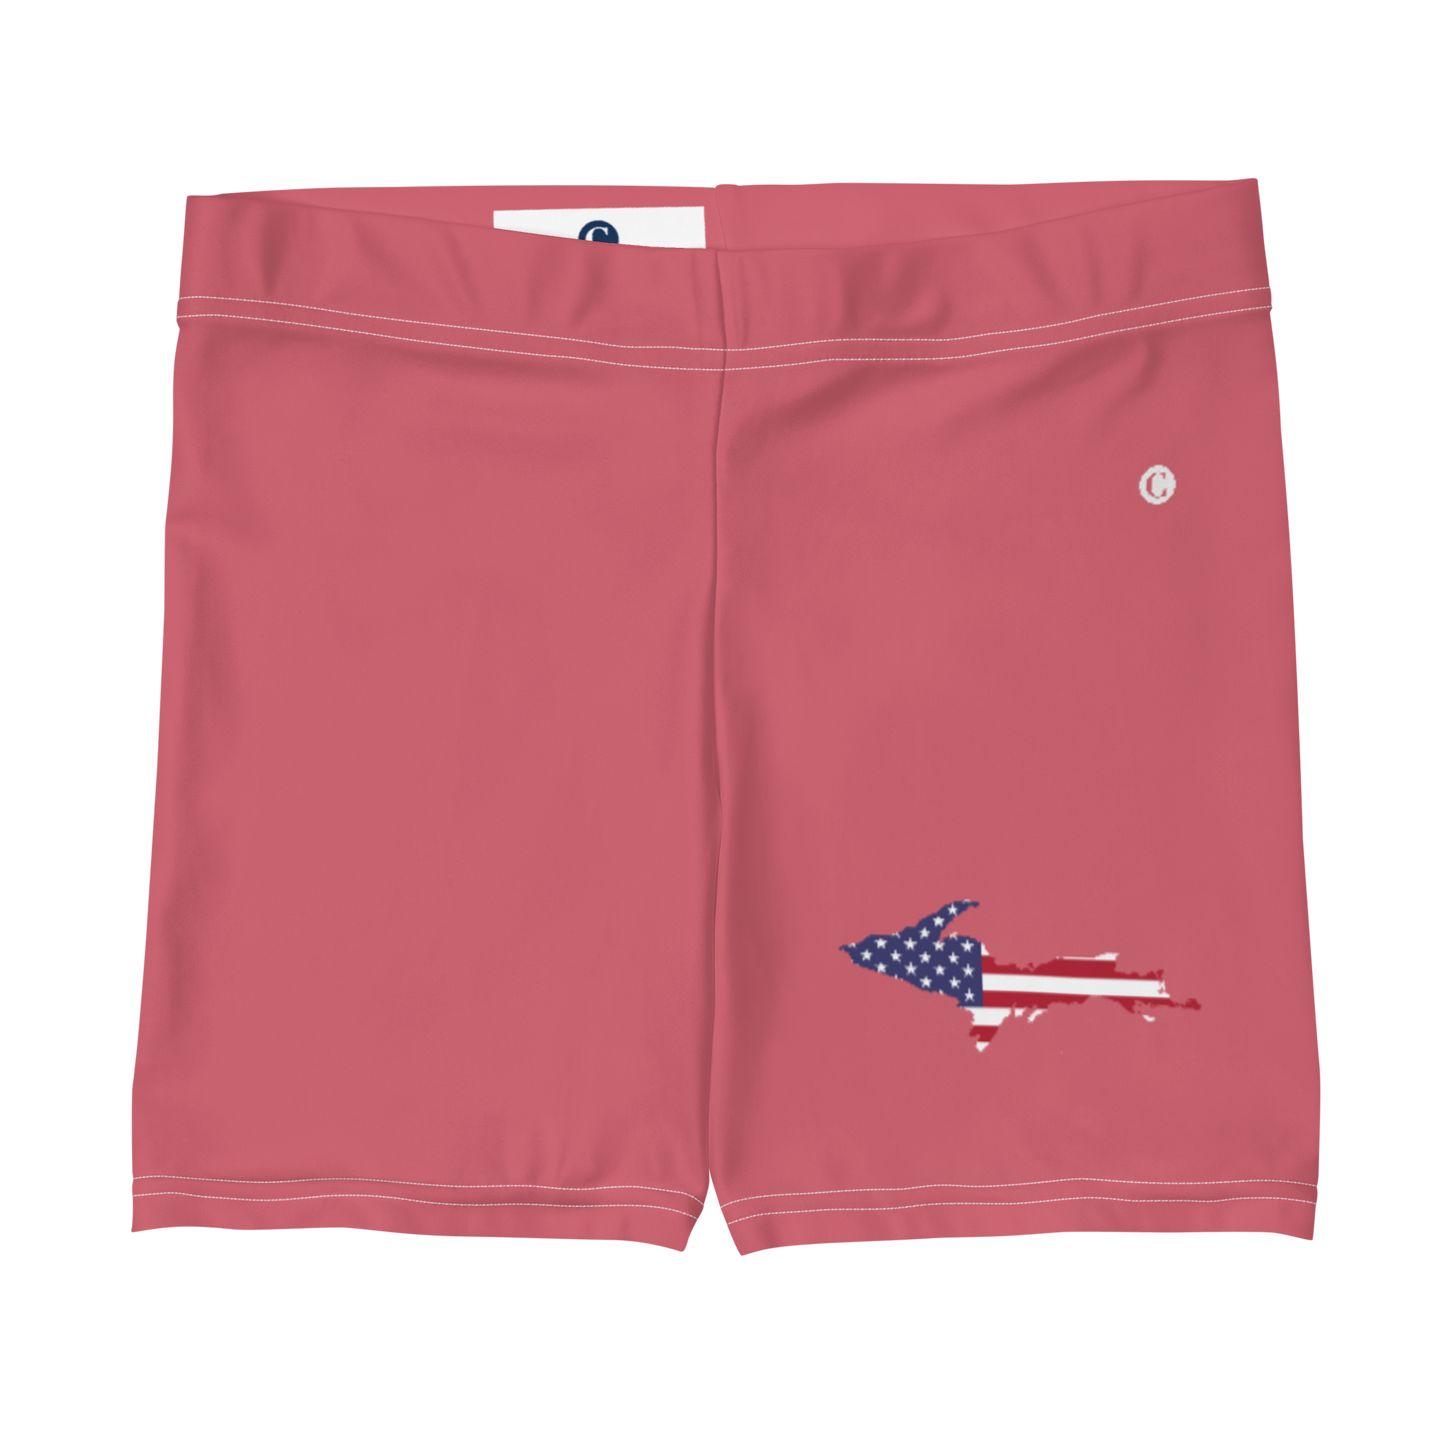 Michigan Upper Peninsula Tight Shorts (w/ UP Outline) | Watermelon Pink